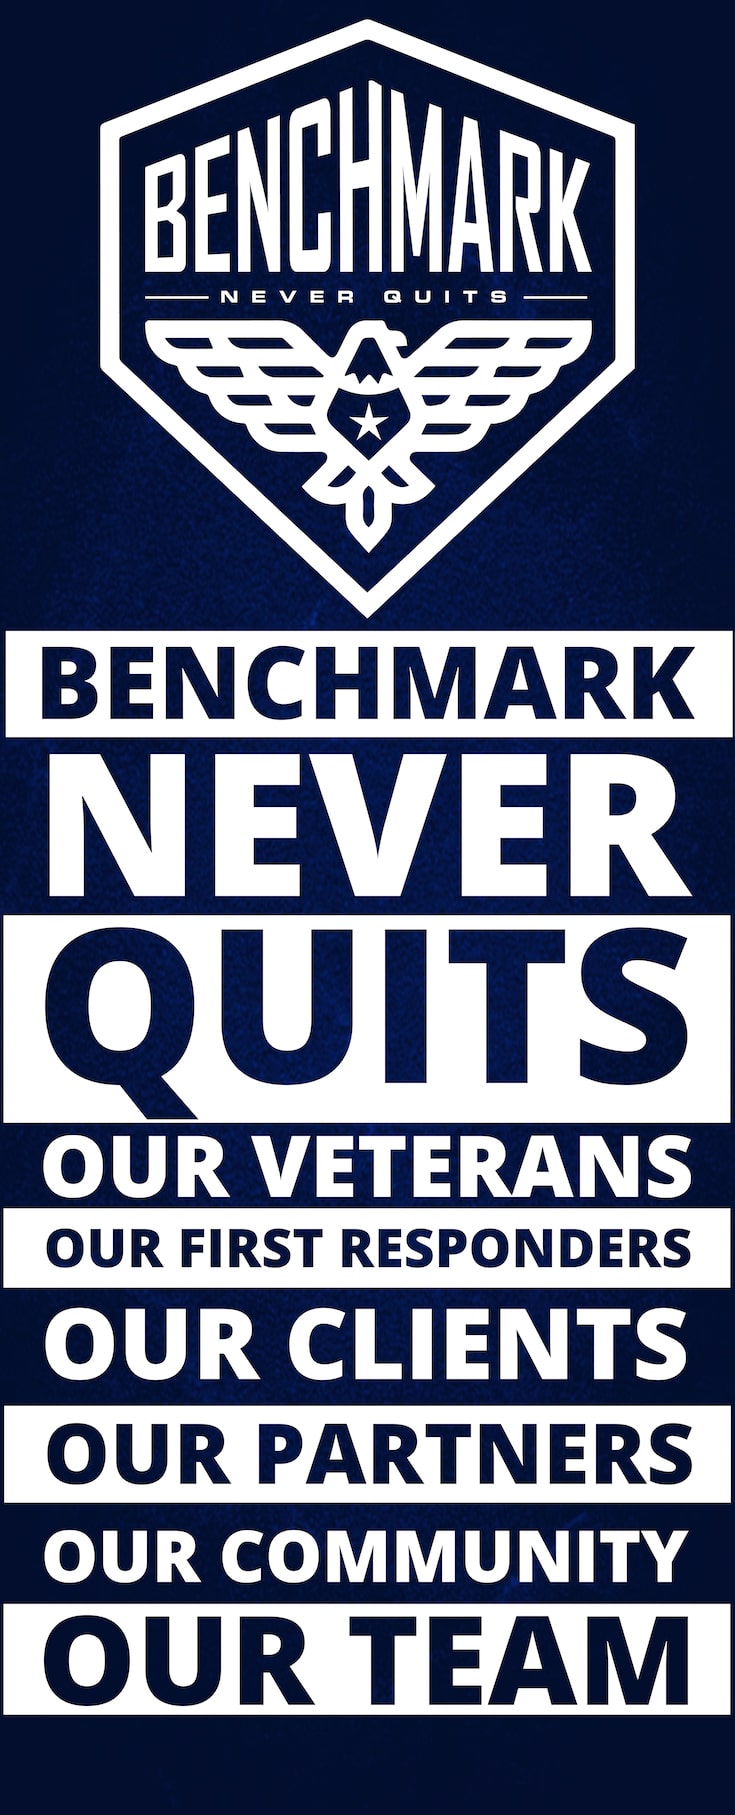 Benchmark Never Quits stand-up banner artwork